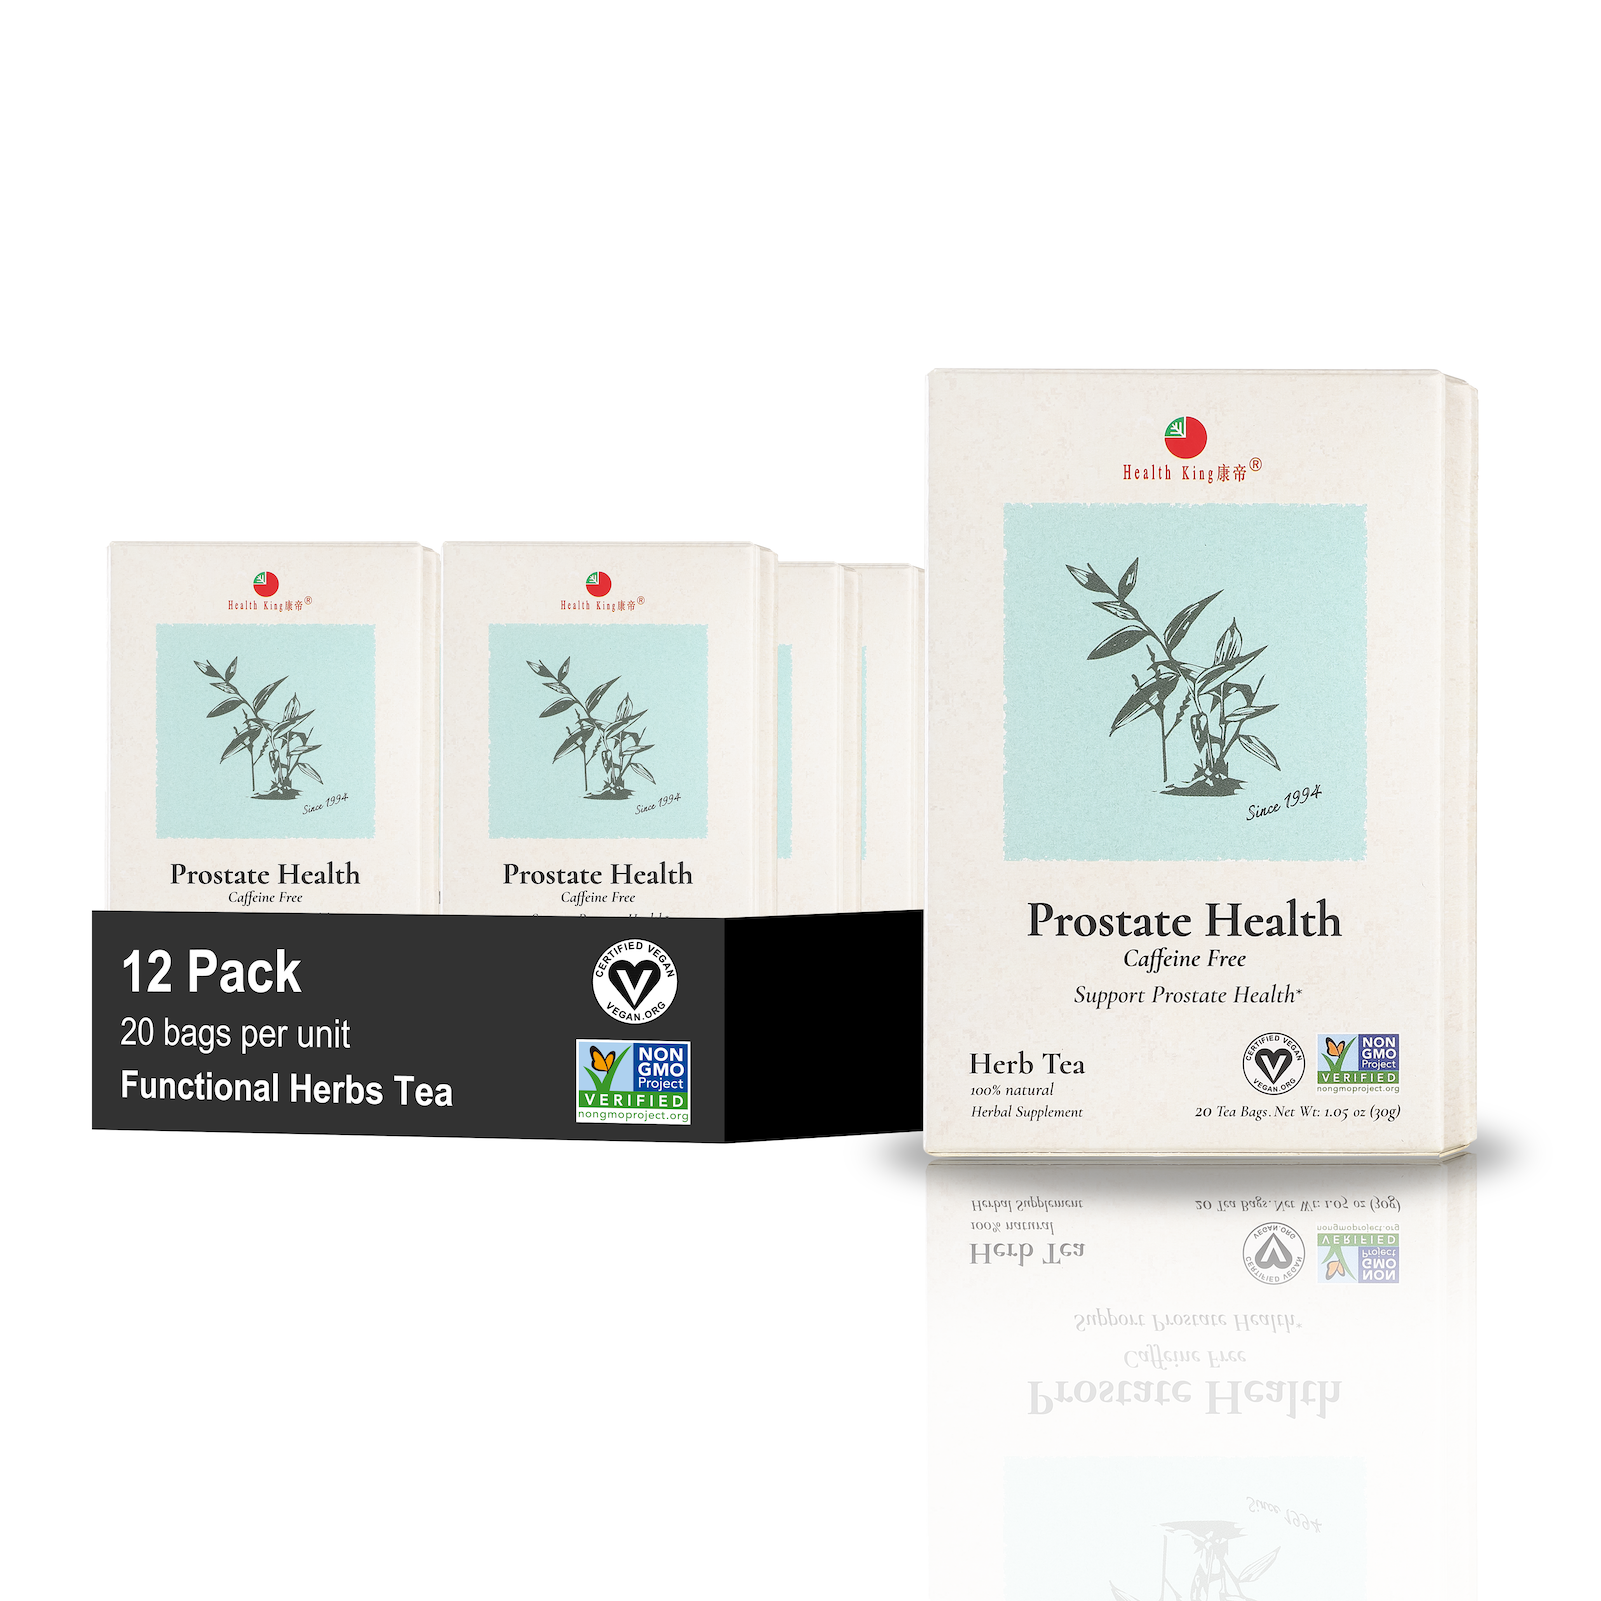 Twelve-pack of Prostate Health Herb Tea with health benefits for the prostate